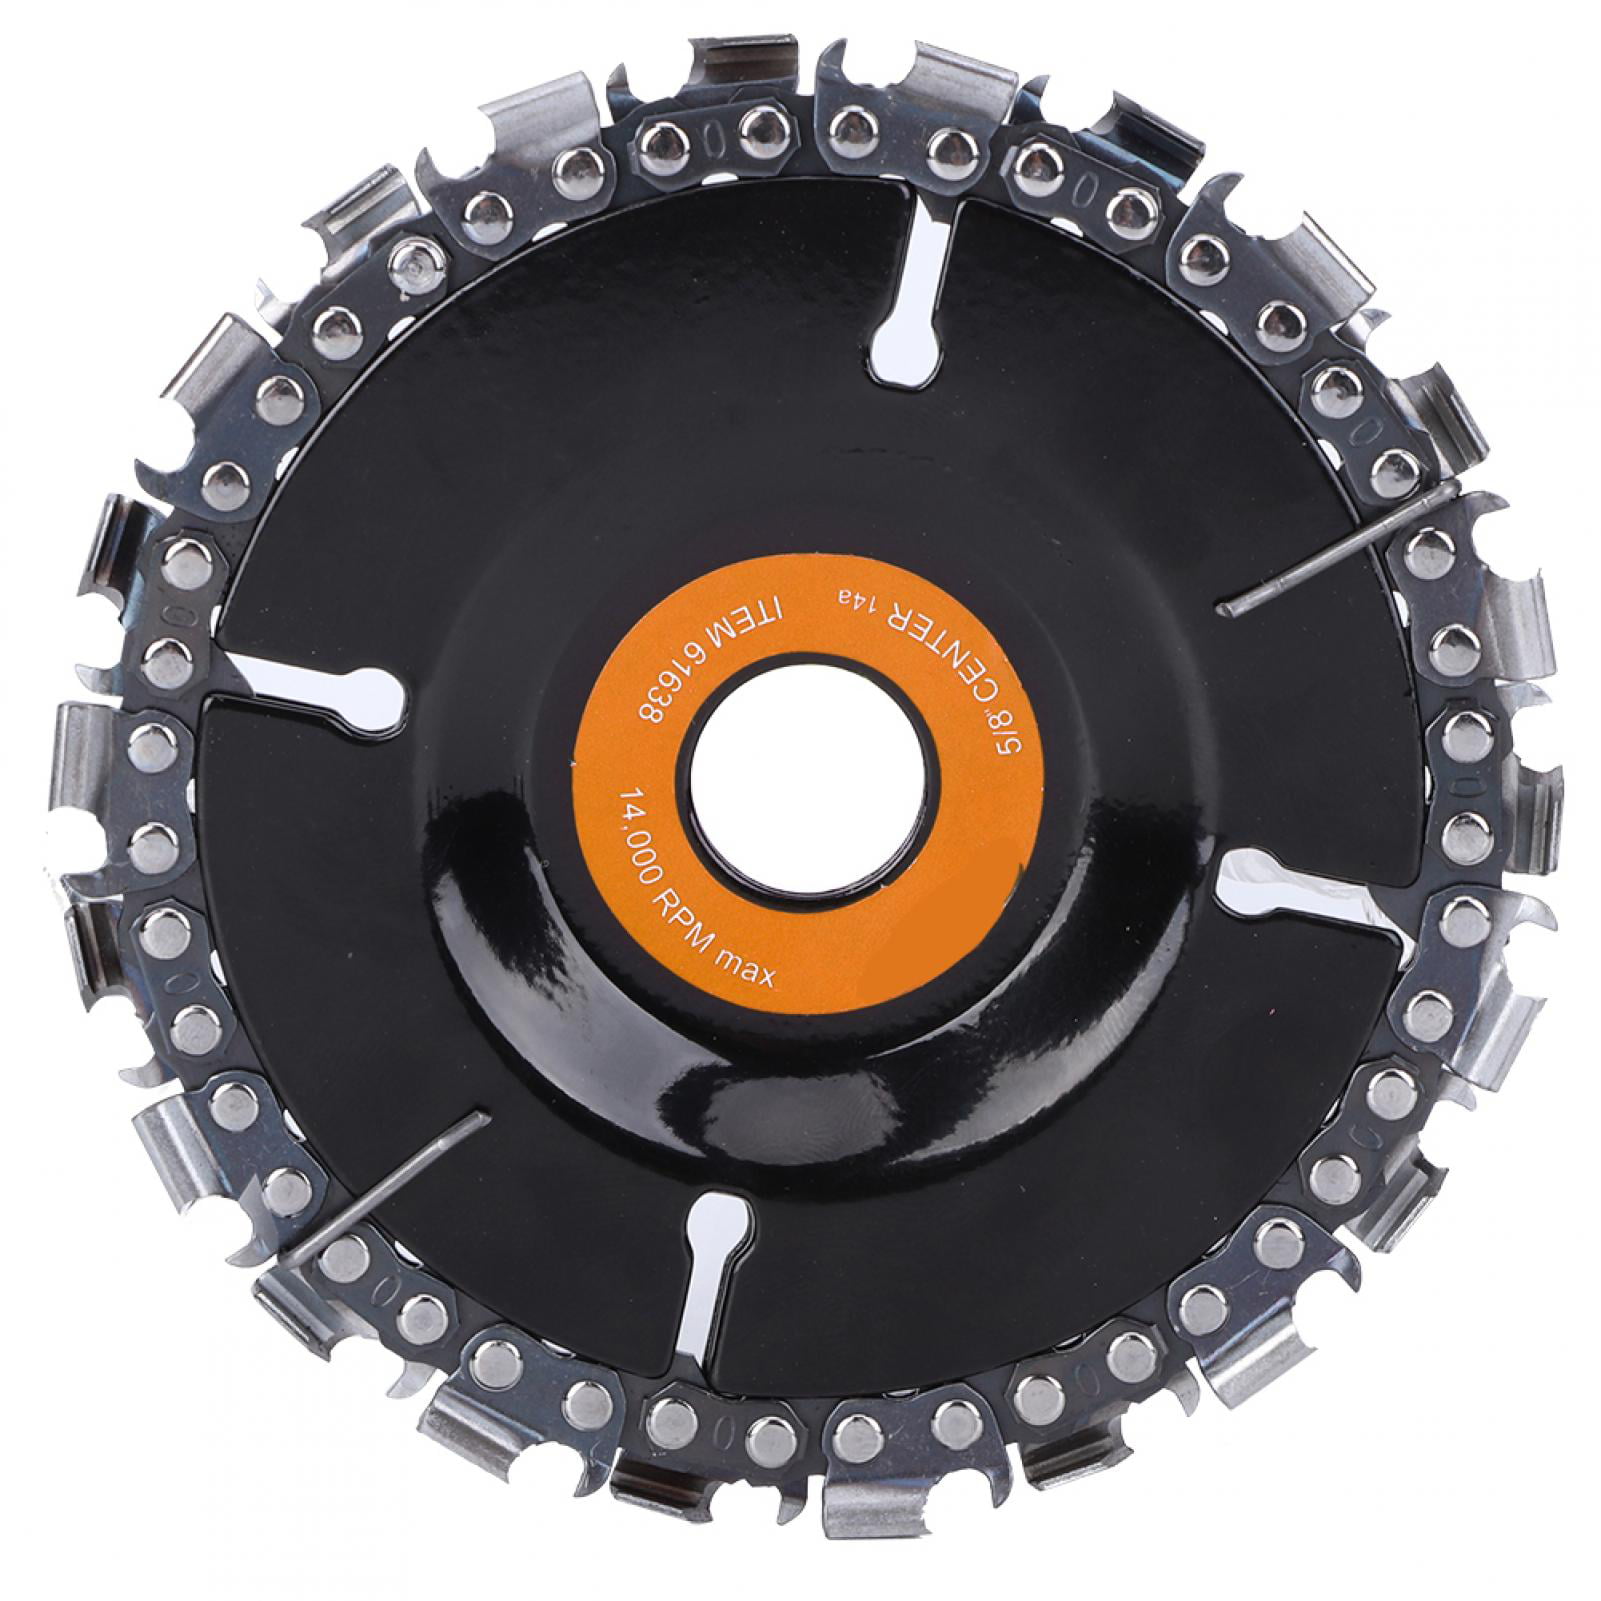 4?Inch Angle Grinder Chain Disc Engraving Durable Woodworking Tool Black Carbide 22?Teeth 10,000~13,000 RPM Purple Card 